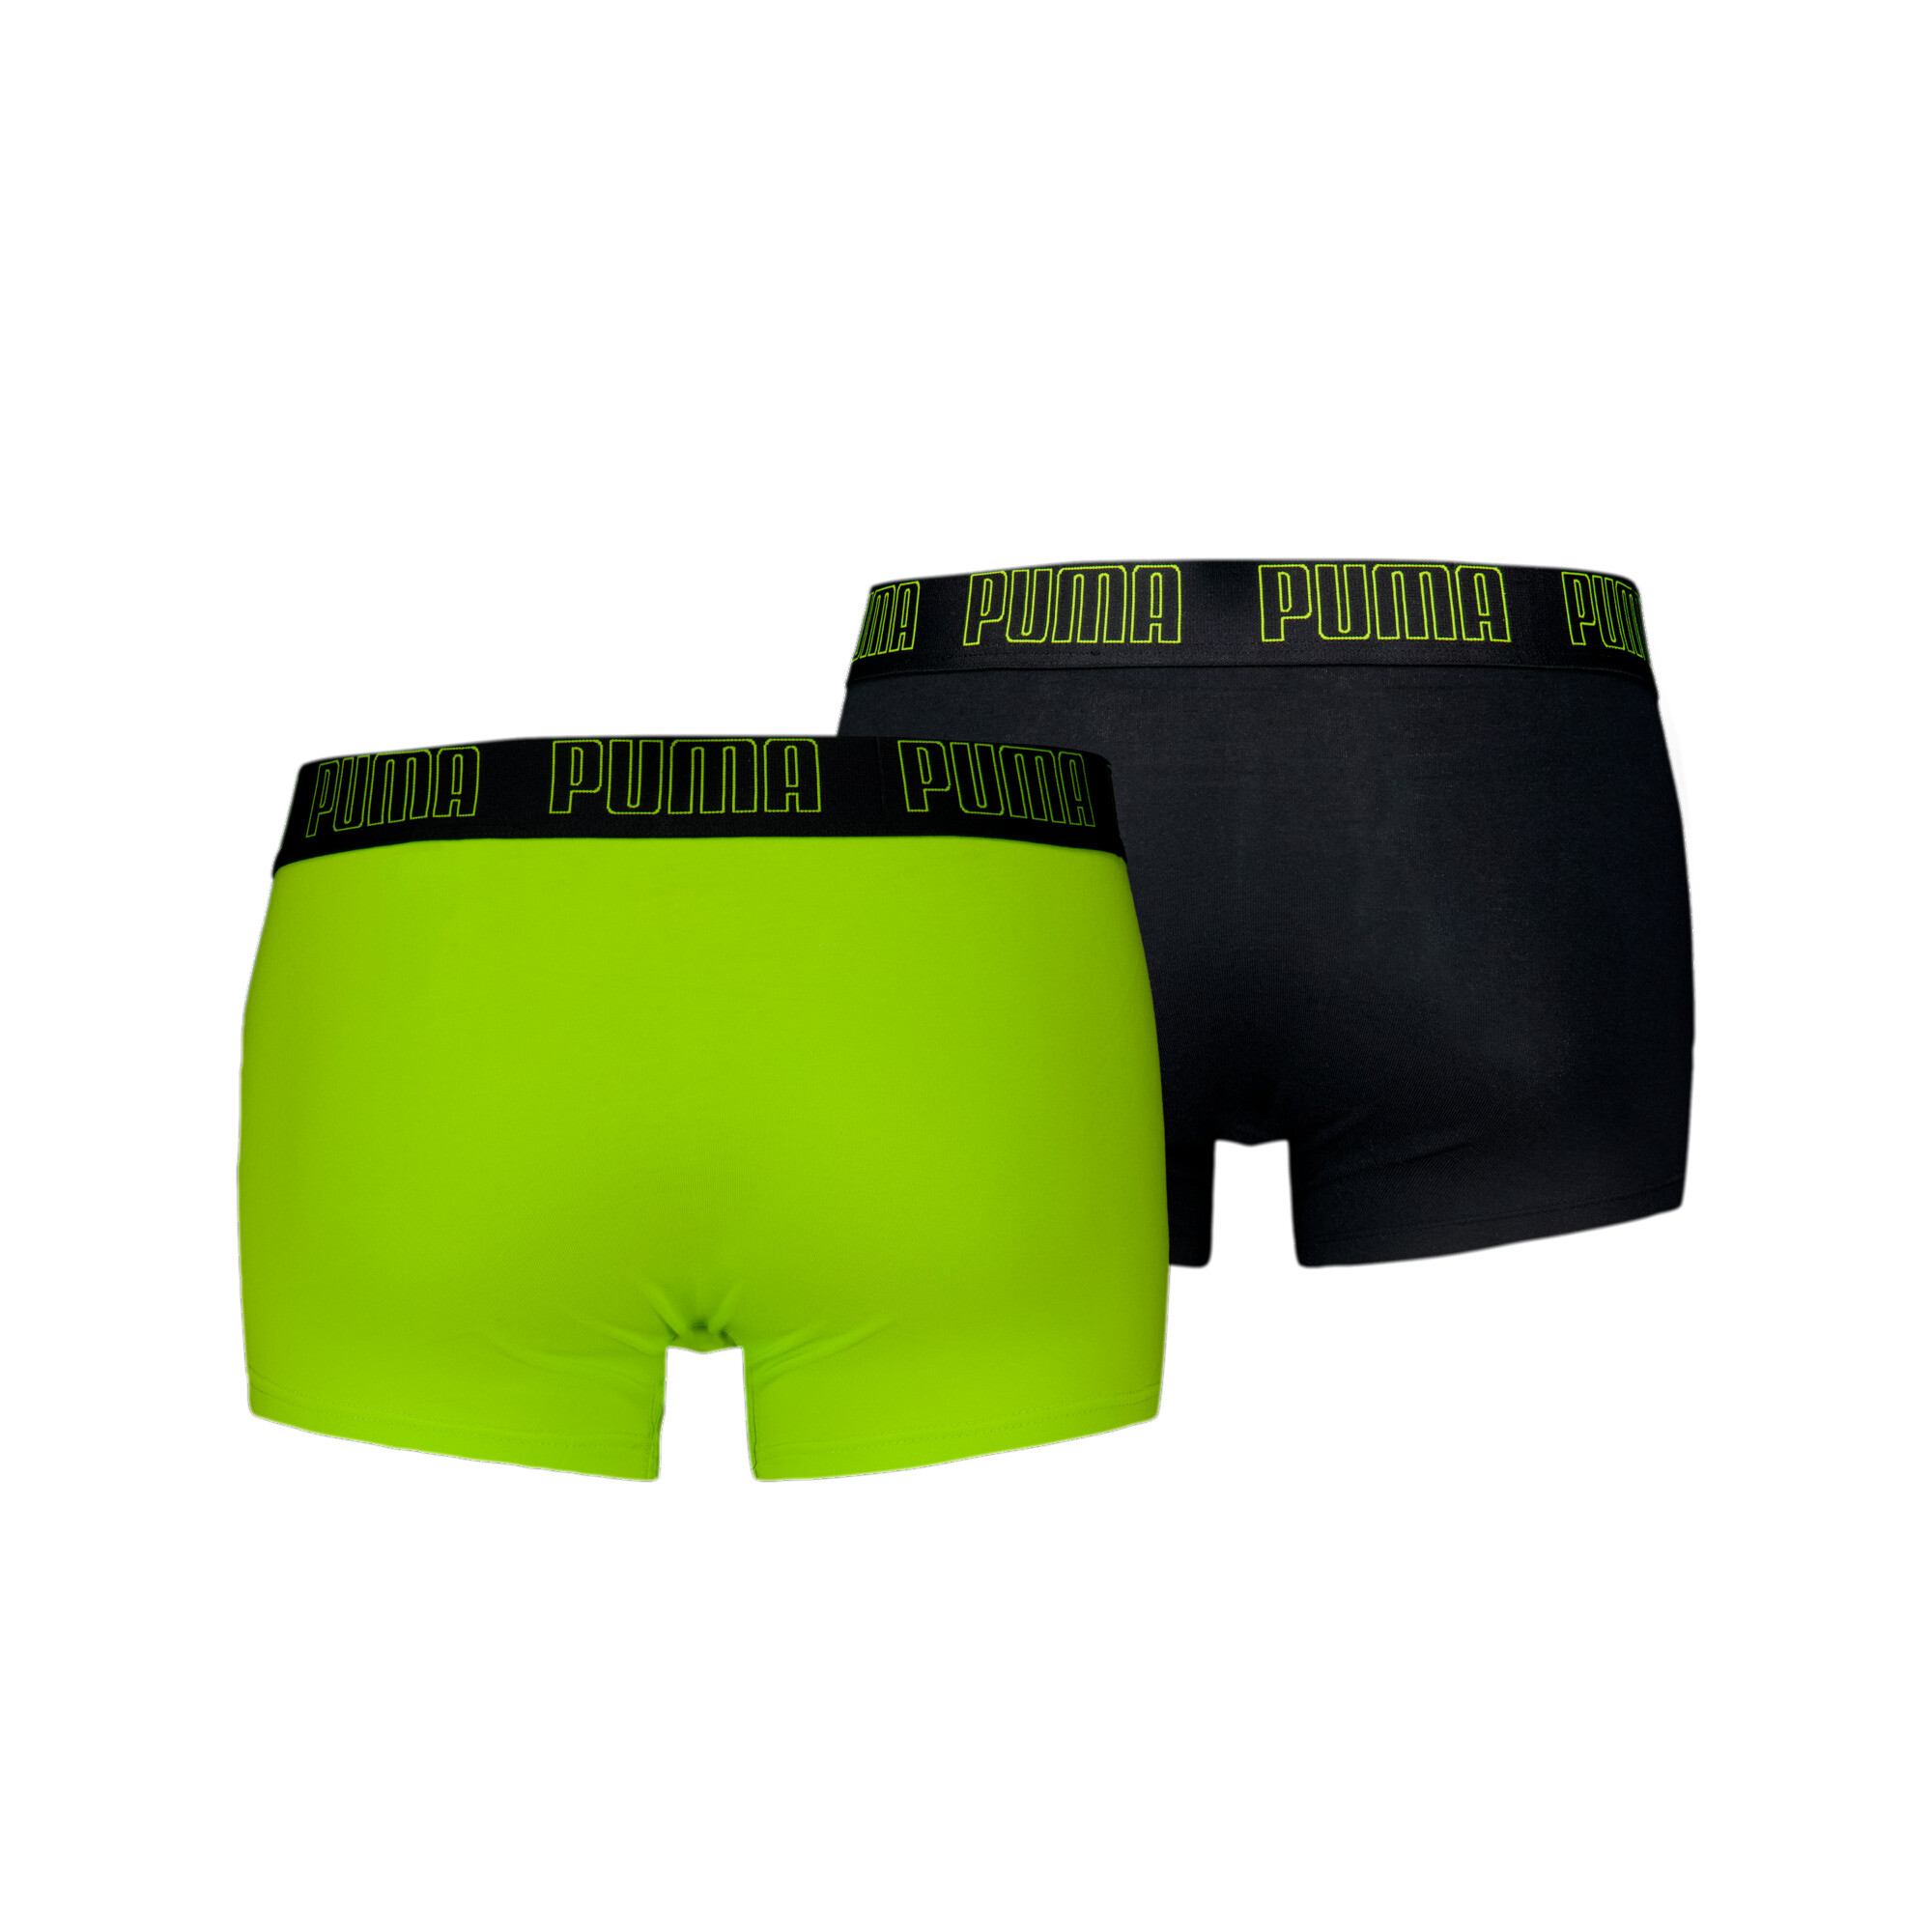 Men's Puma's Trunks 2 Pack, Yellow, Size 4, Clothing